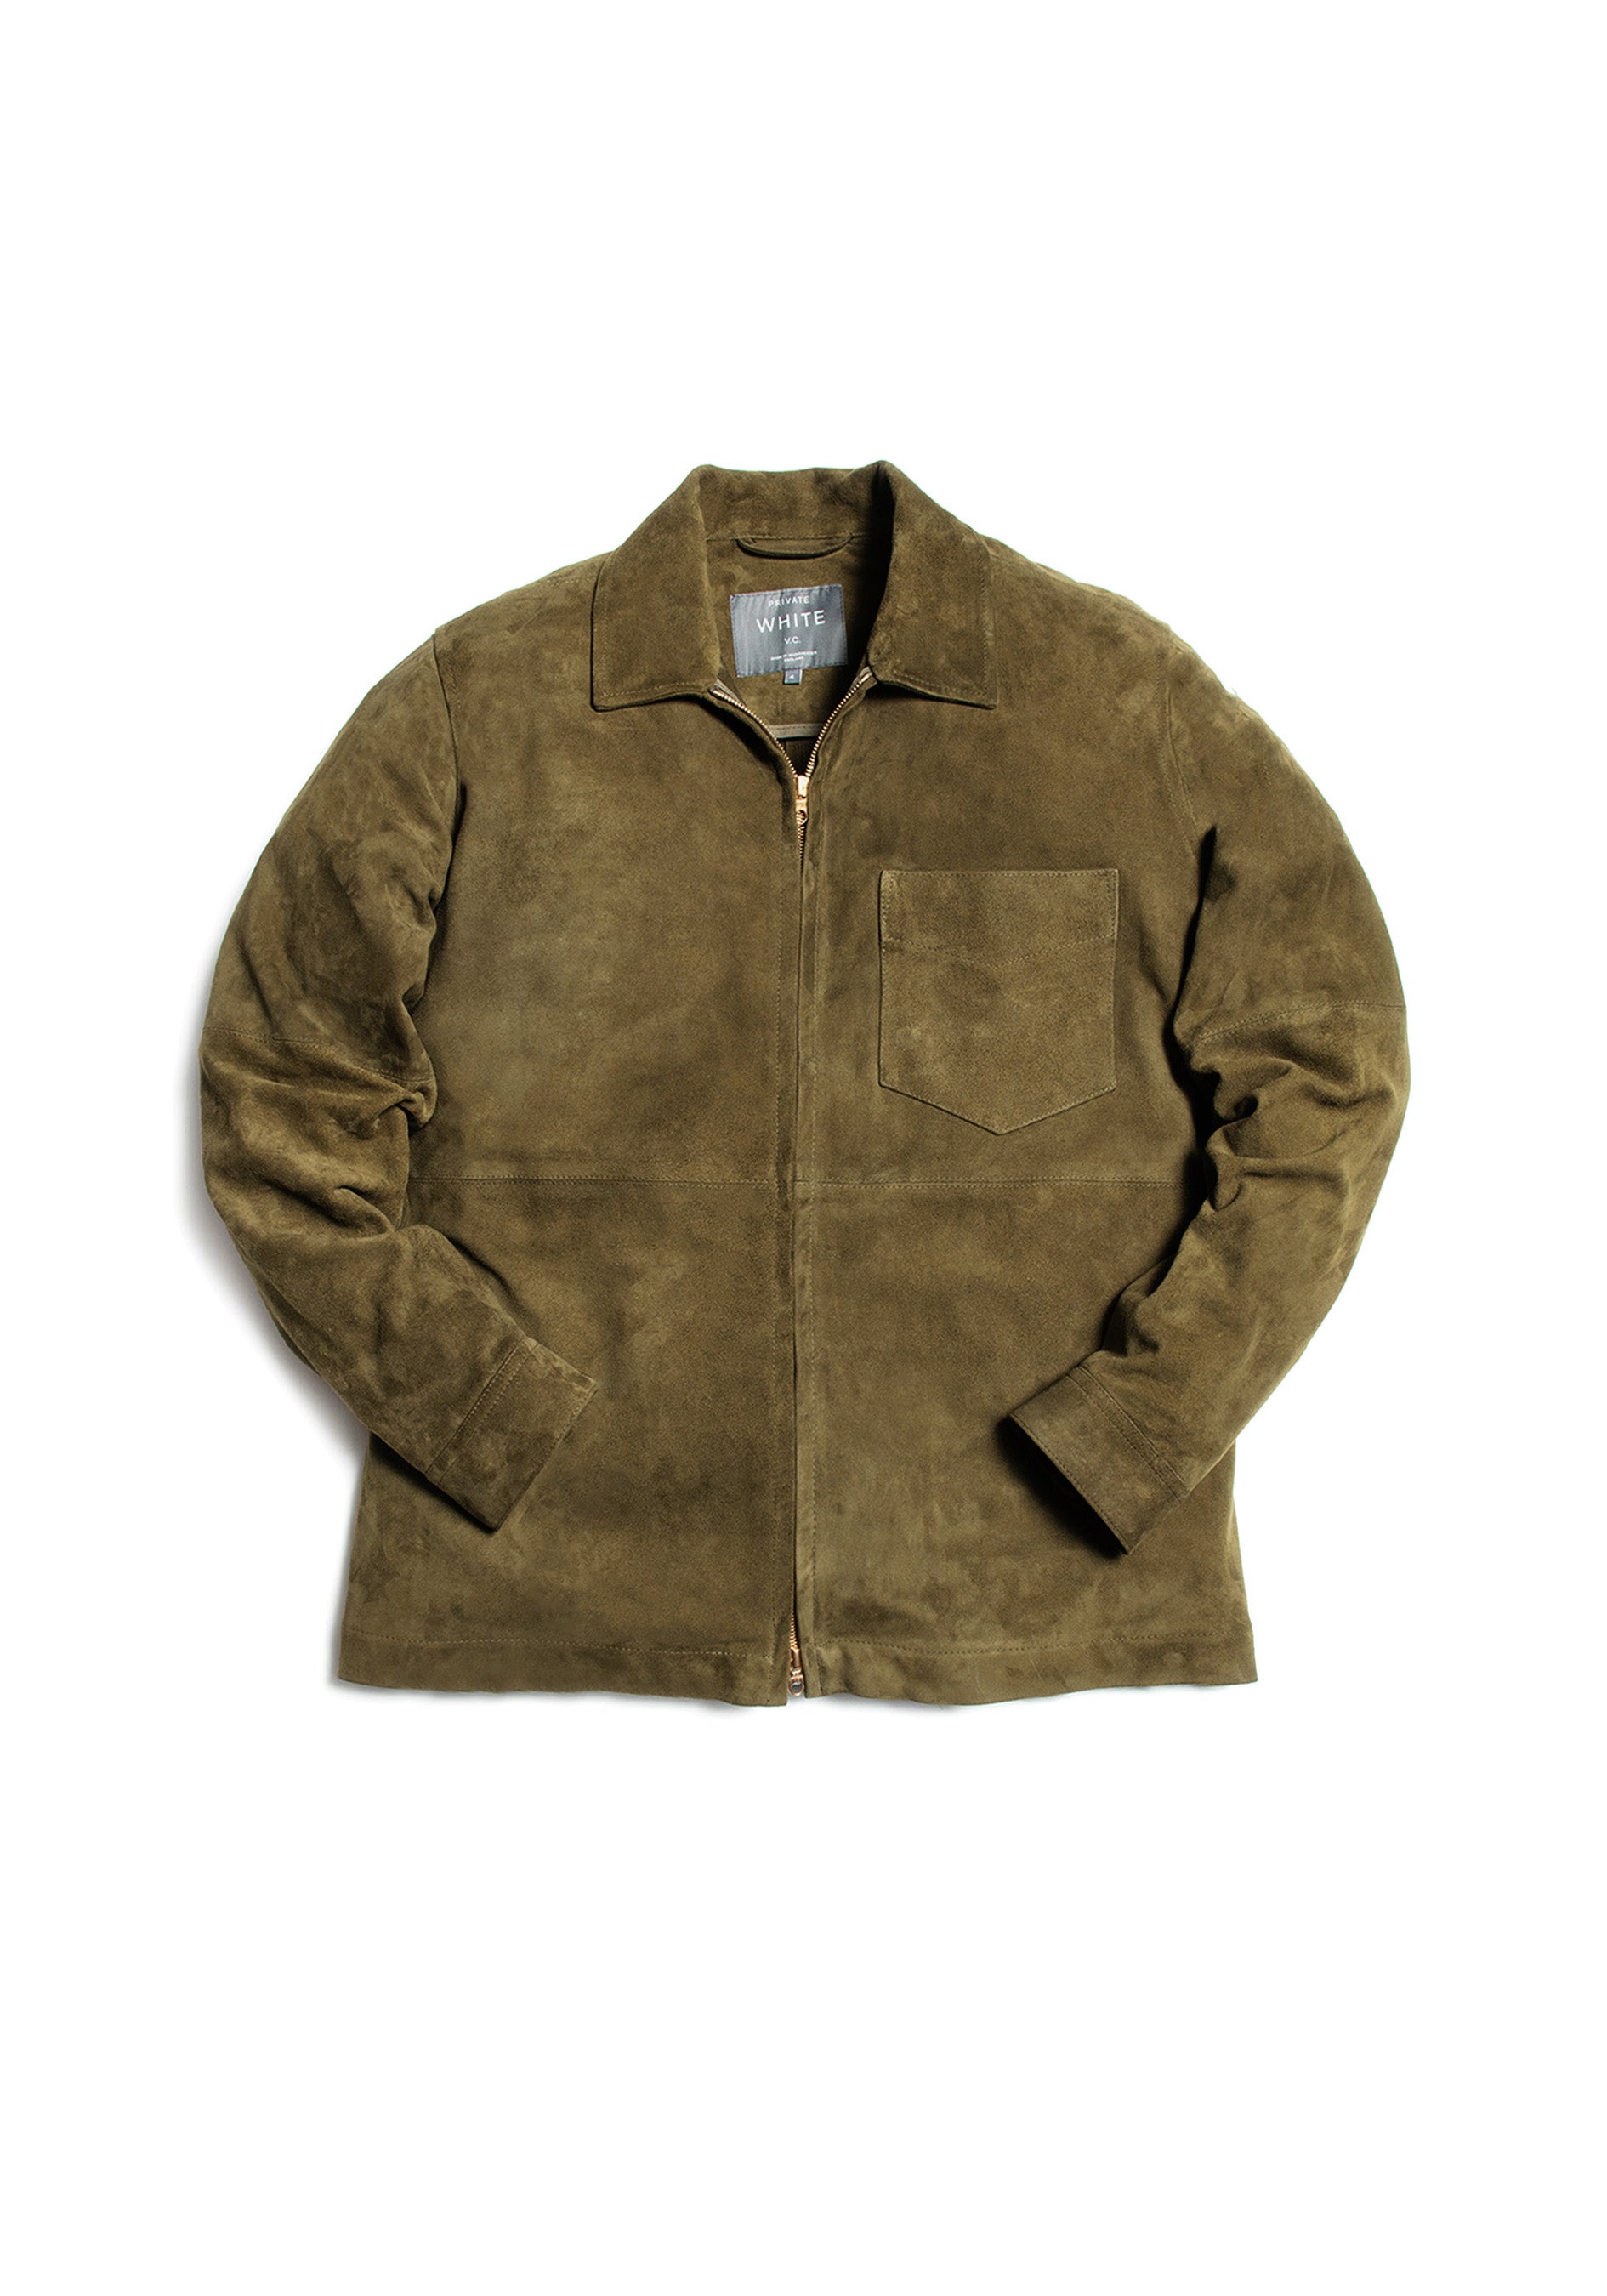 The Suede Panelled Overshirt – PrivateWhite V.C.